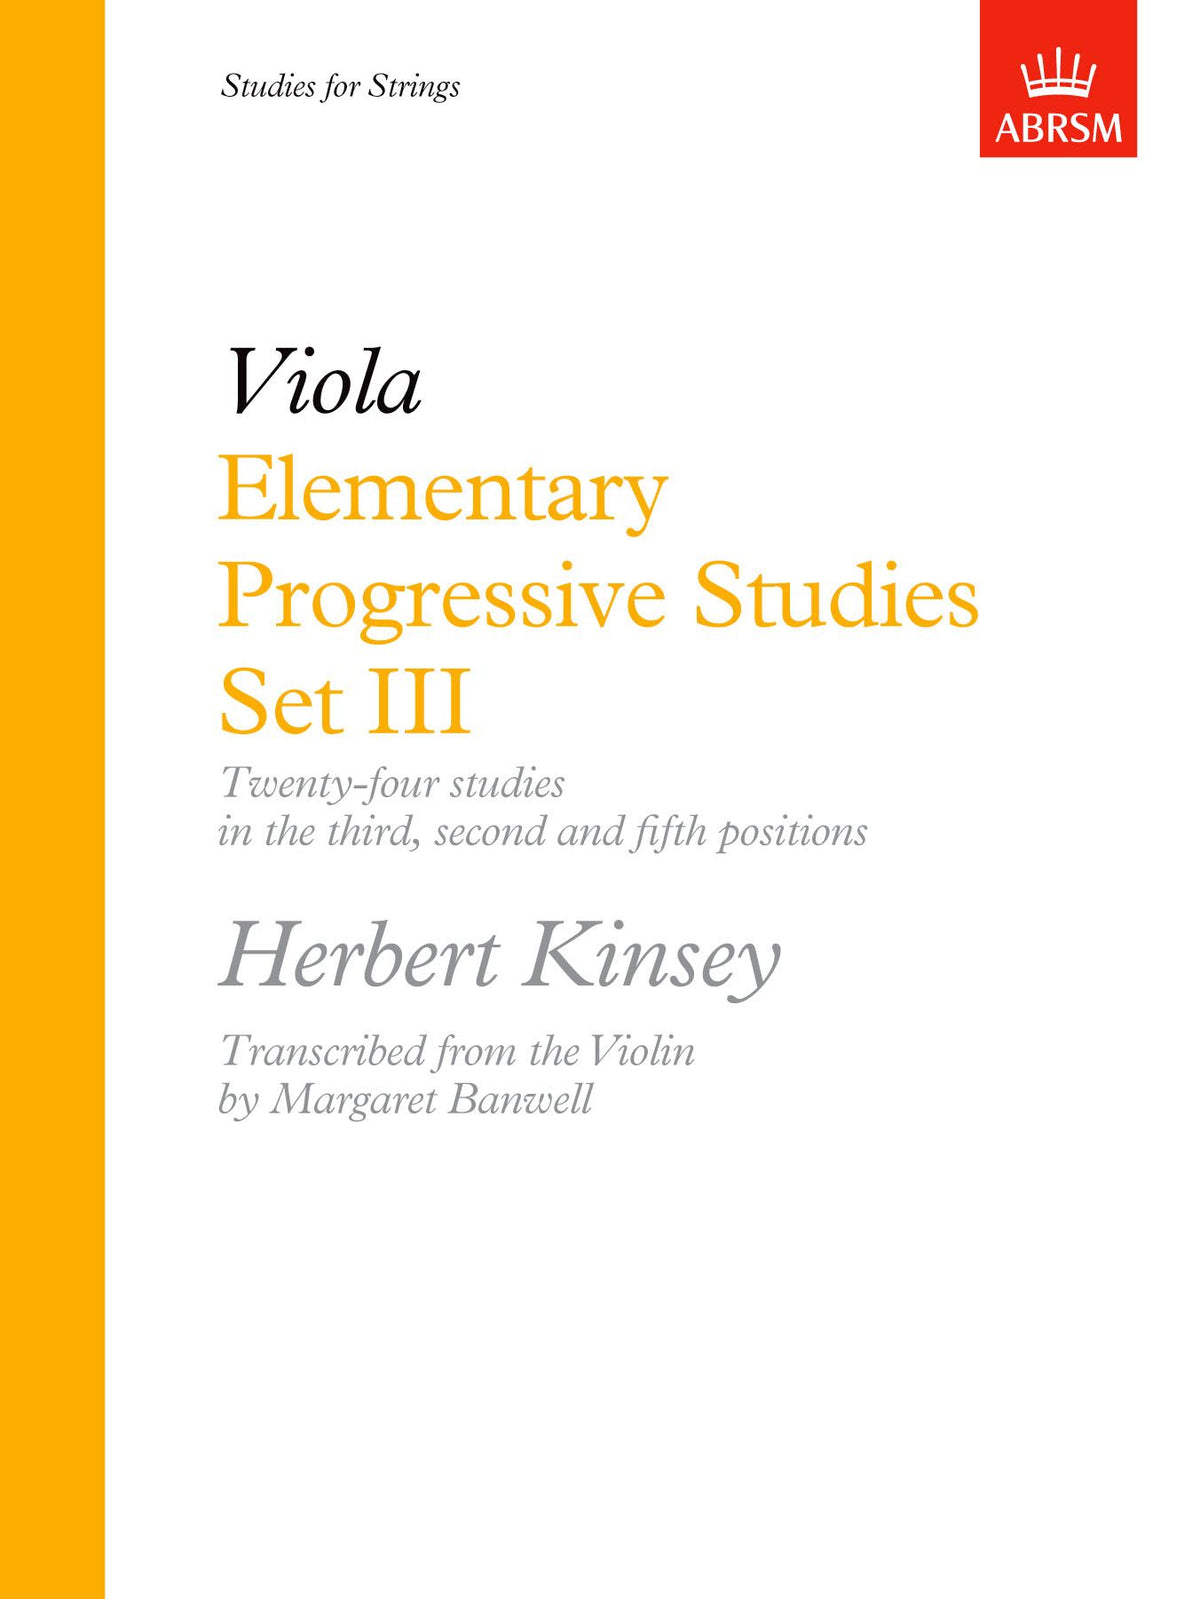 Elementary Progressive Studies Set 3: 3rd, 2nd and 5th Positions